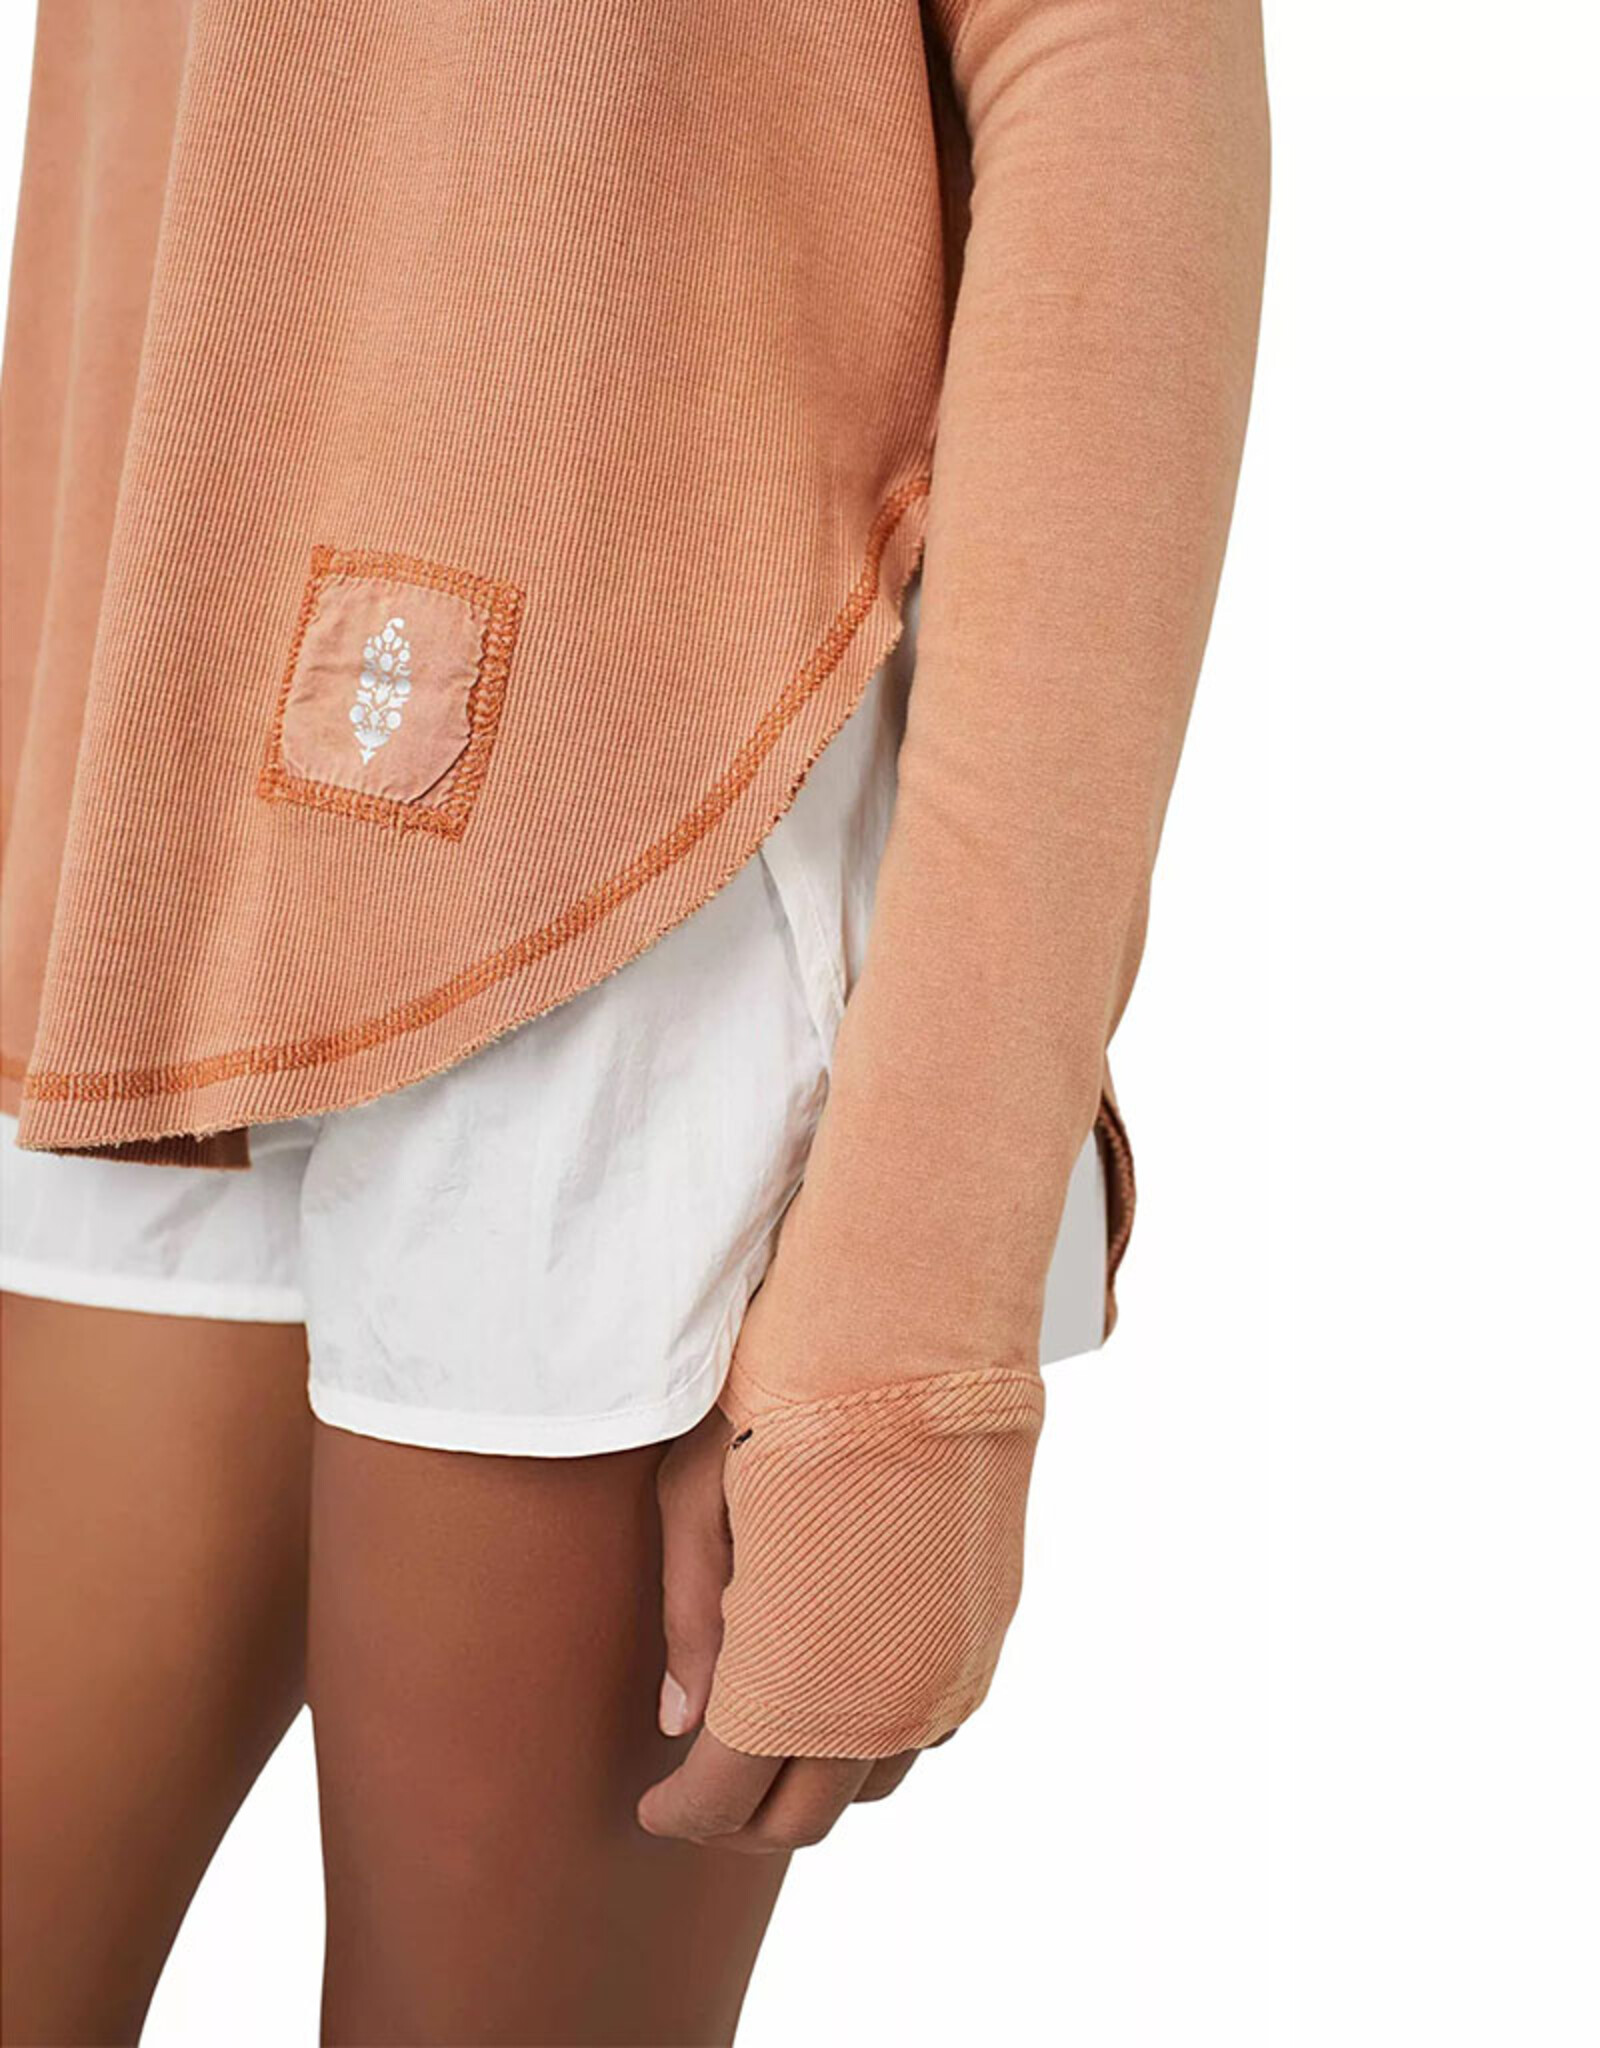 FP MOVEMENT SIMPLY LAYER PULLOVER